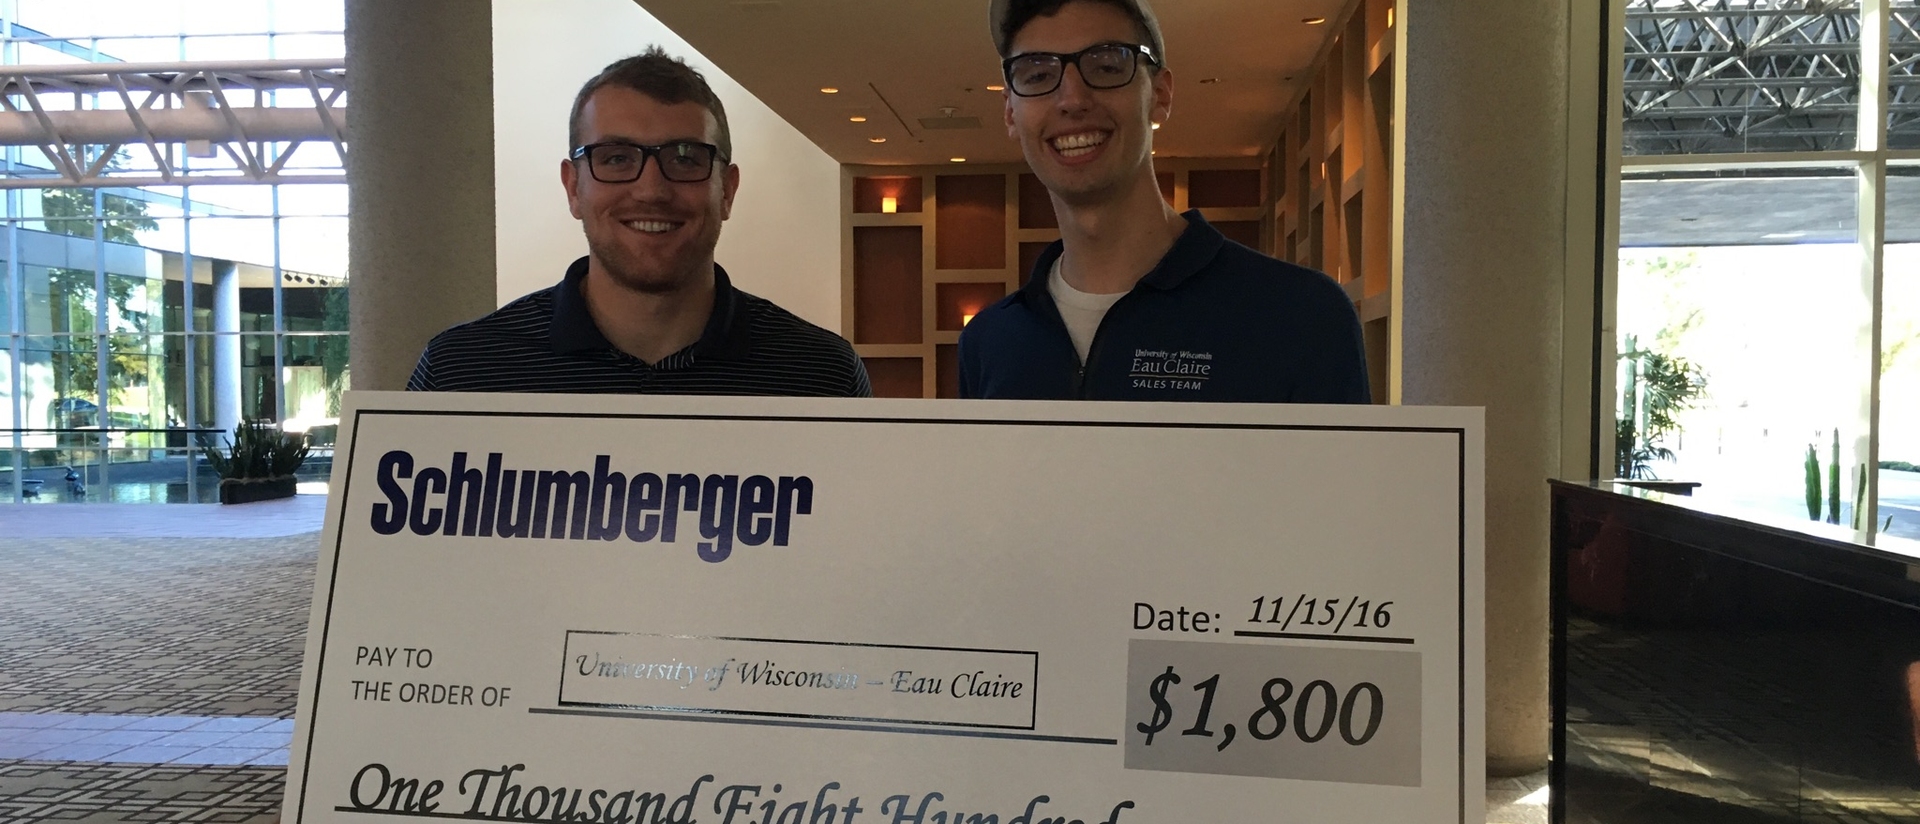 Schlumberger check with students